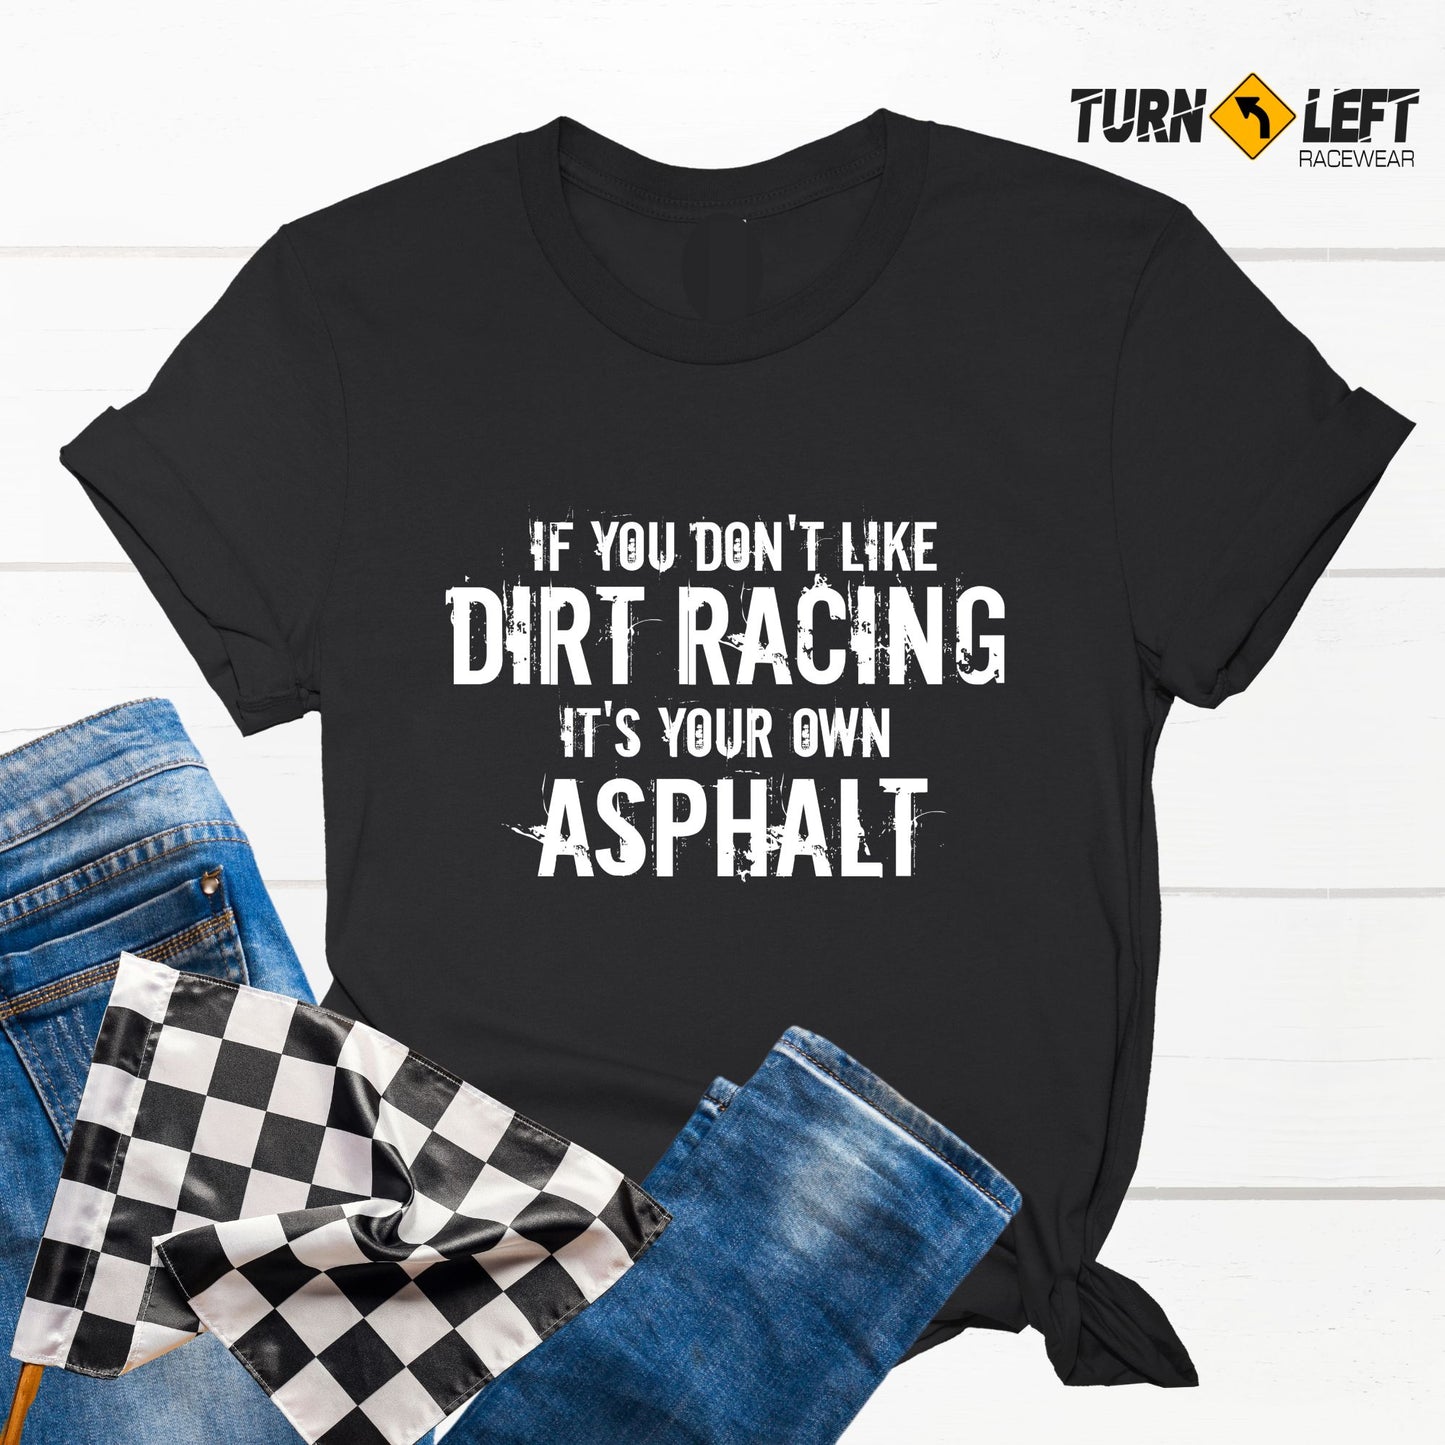 If You Don't Like Dirt Track Racing It's Your Own Asphalt T-Shirt . Funny Dirt Racing Quote Shirts, Funny Racing Gifts 